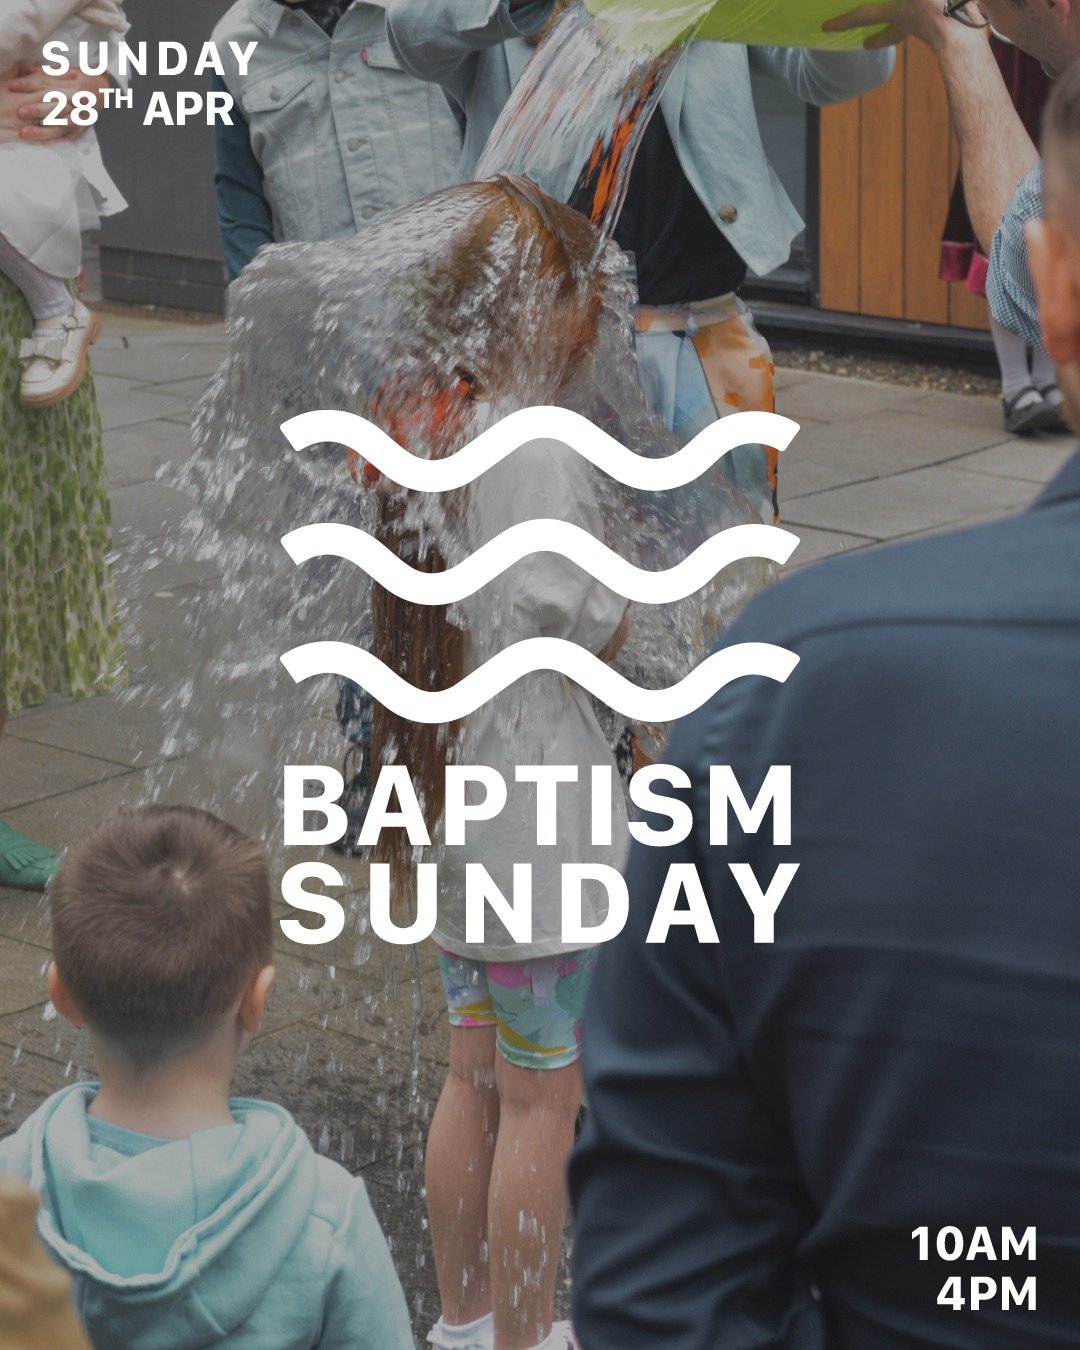 💧 BAPTISM'S INCOMING 💧

Come along and join us across the gatherings on Sunday 28th April, as we celebrate Baptisms once again!

Be praying ahead of the day, as believers make public their living faith in Jesus and for the pouring out of His Spirit